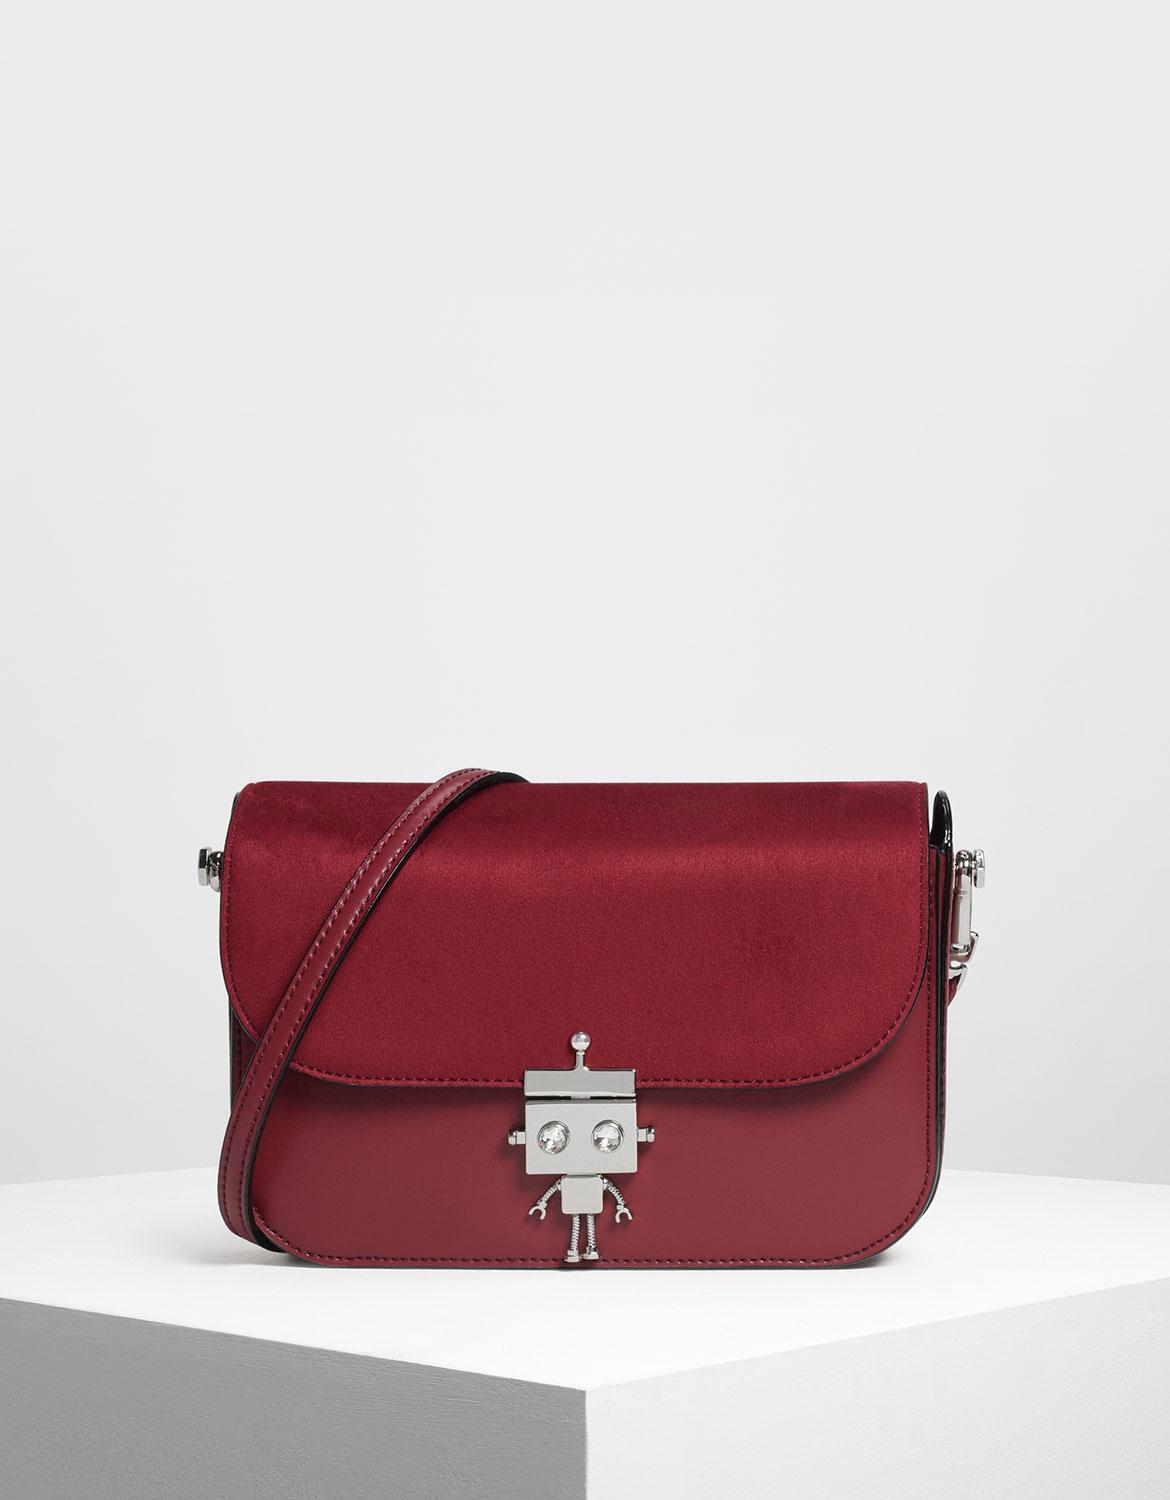 Charles & Keith Robot Detail Push-lock Bag in Maroon (Red) | Lyst